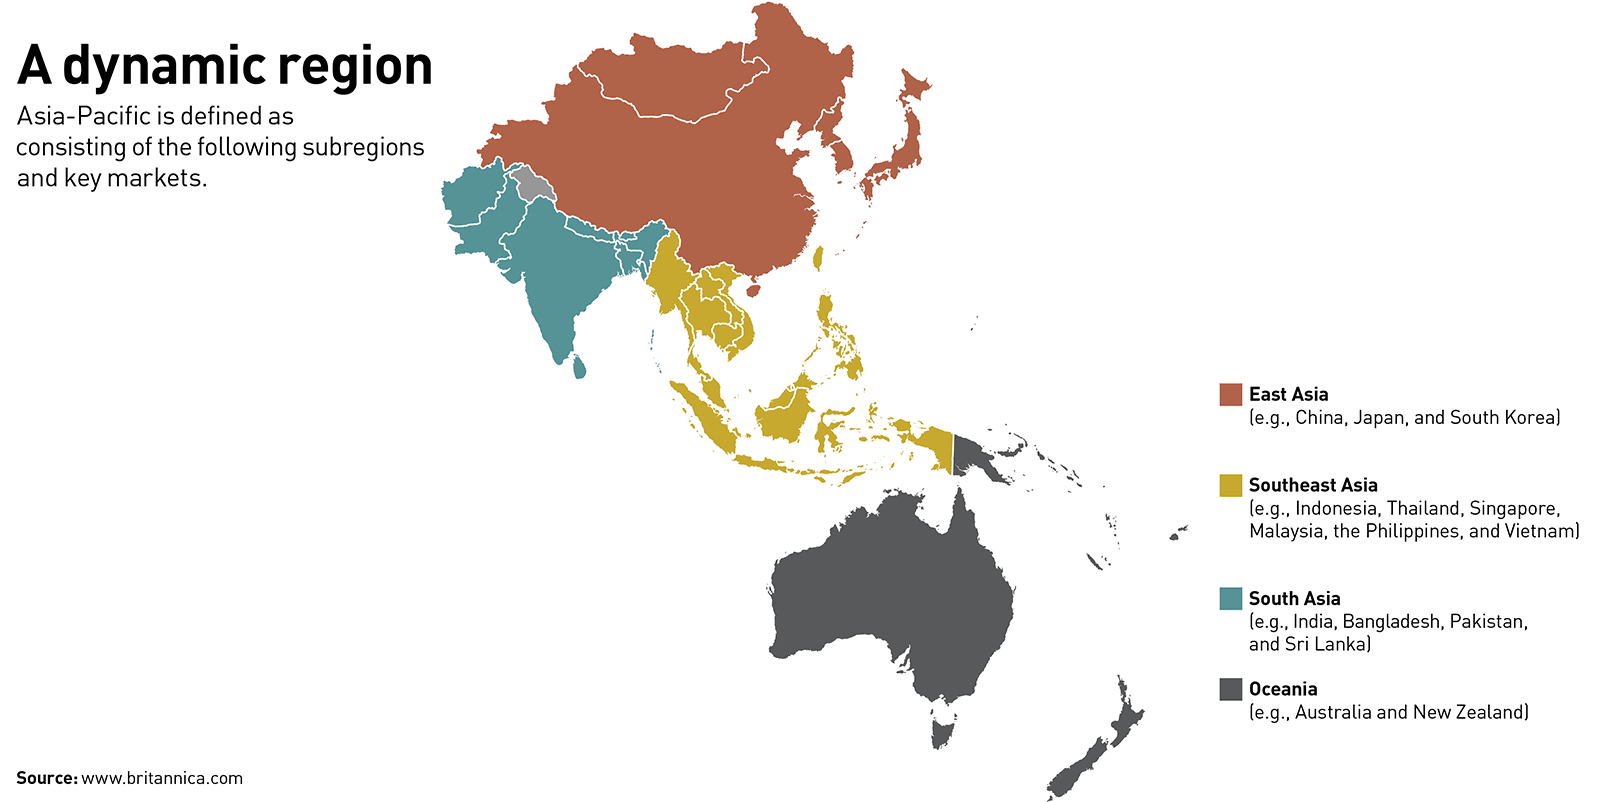 A map of Asia-Pacific broken into four color-coded areas: East Asia (brown), Southeast Asia (yellow), South Asia (teal), and Oceania (gray).